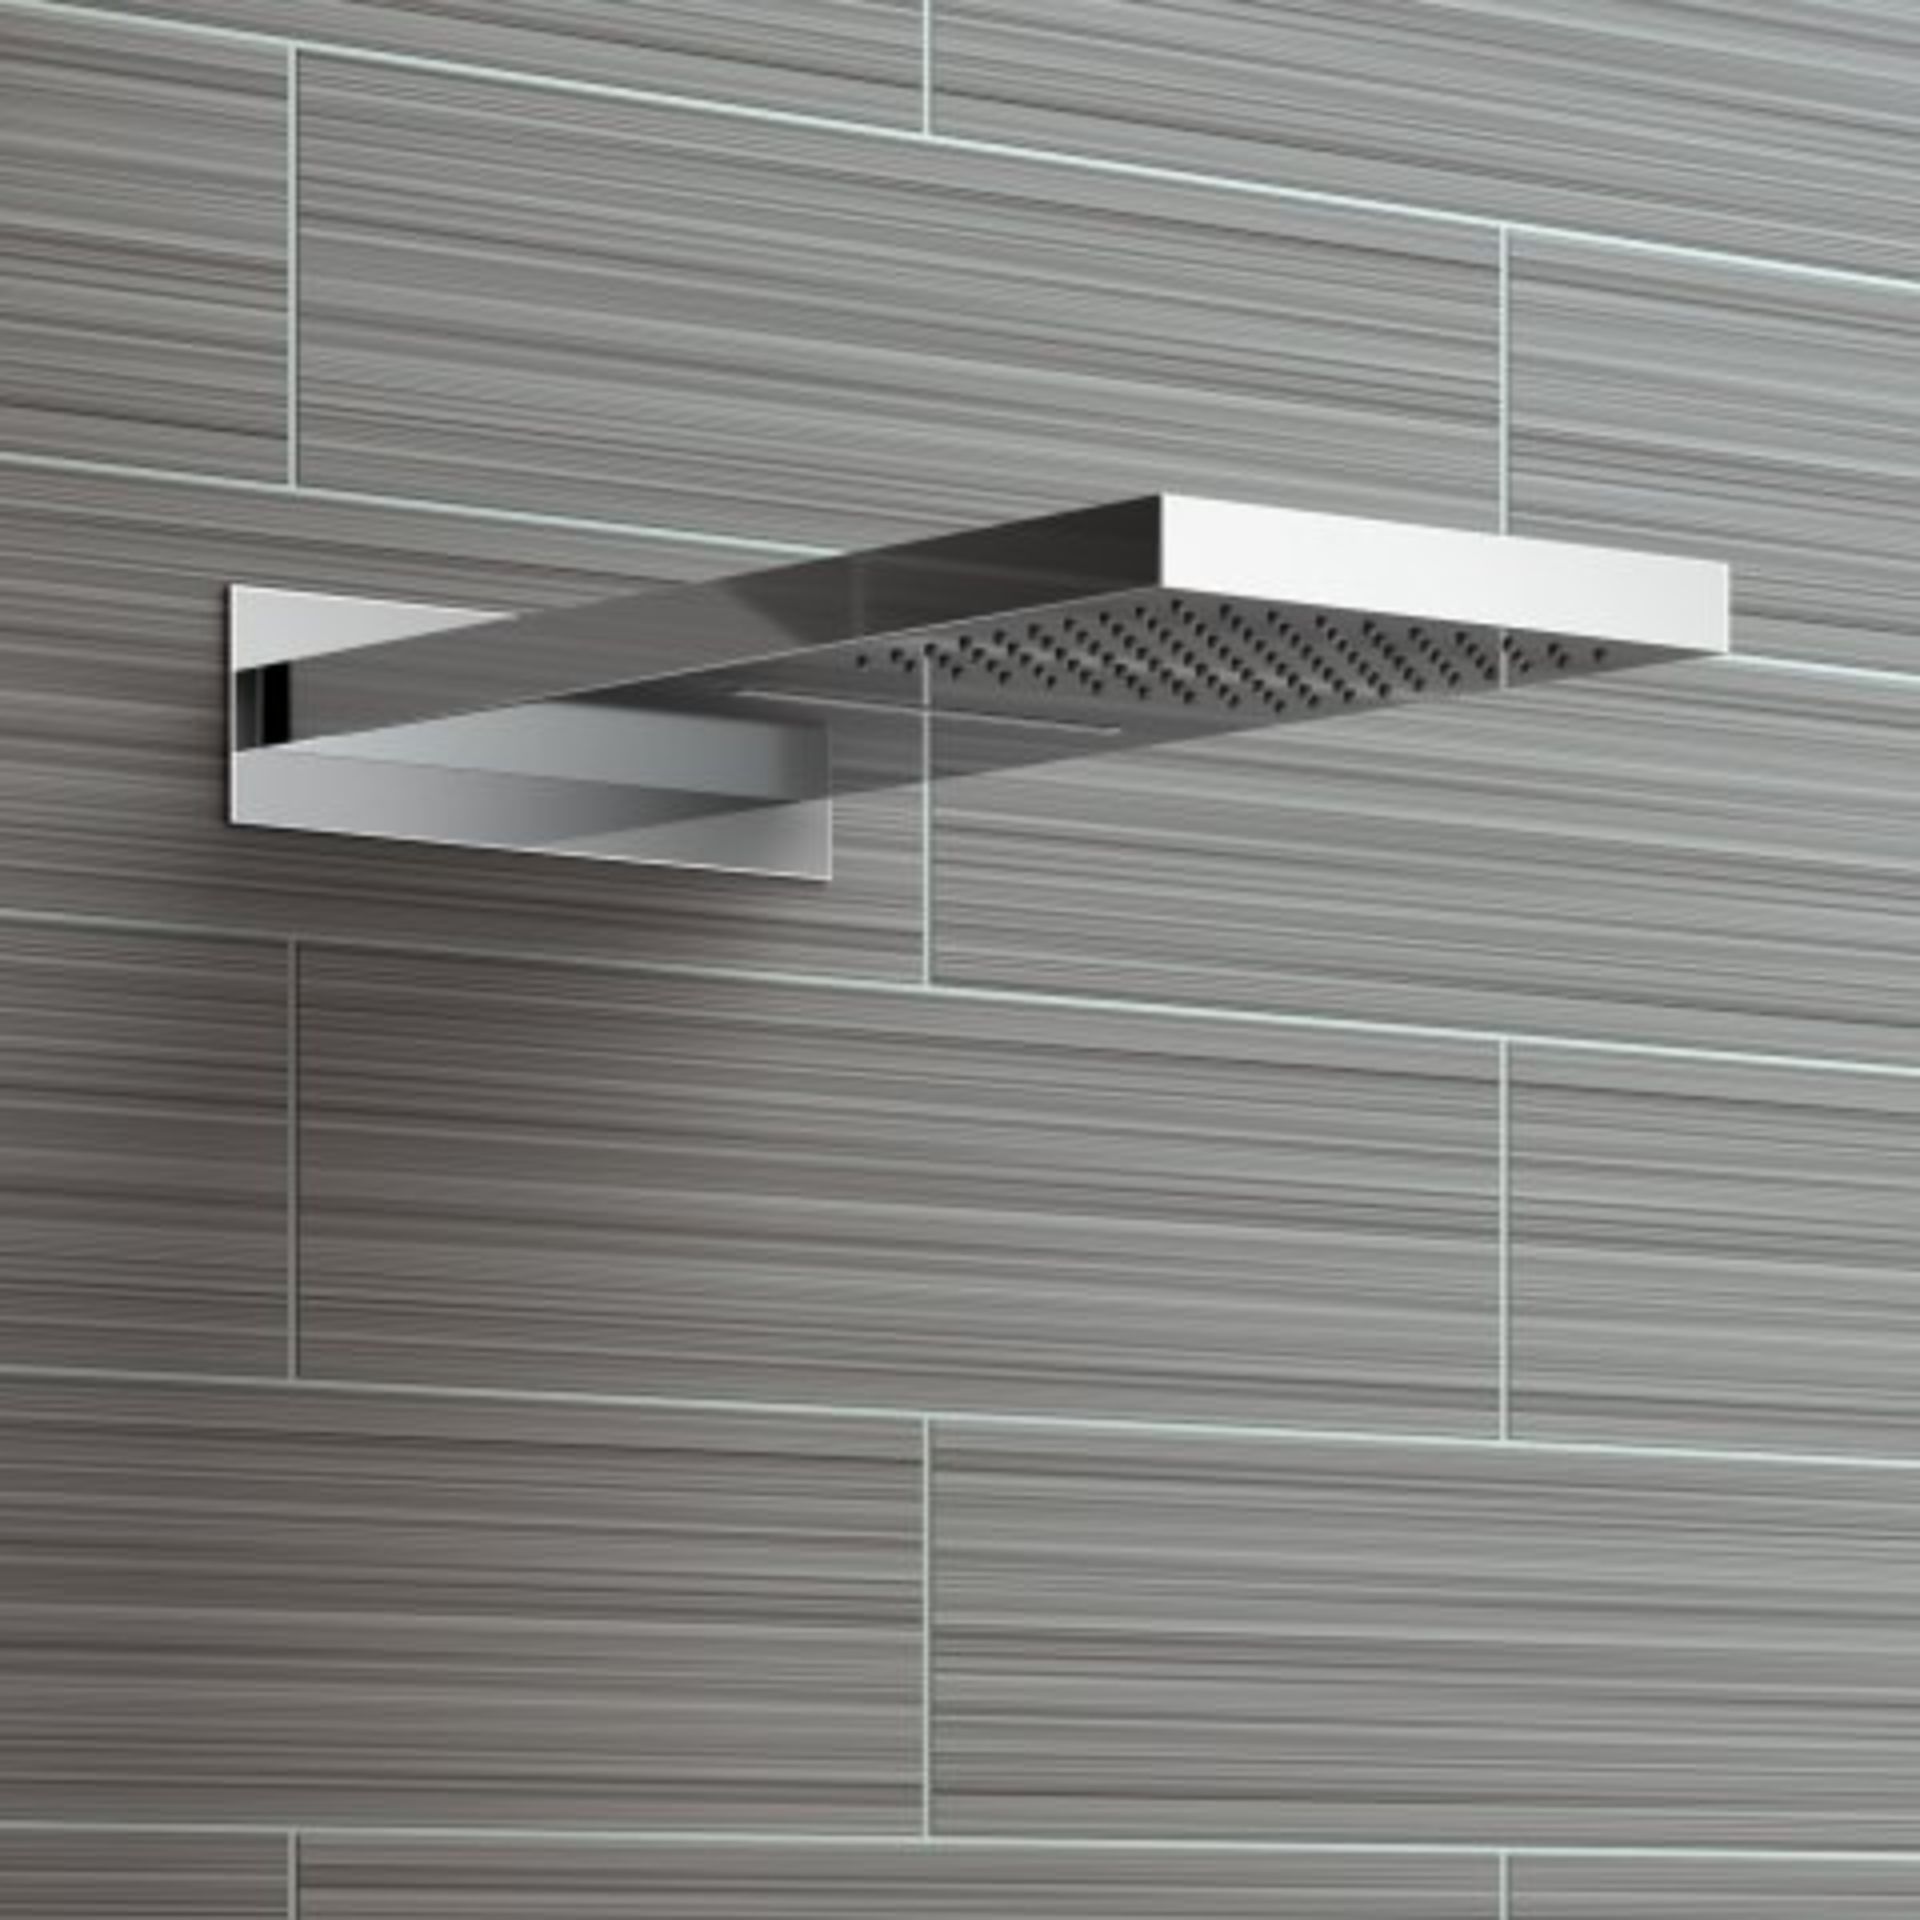 (N5) Stainless Steel 200x500mm Waterfall Shower Head. RRP £374.98. "What An Experience": Enjoy - Image 3 of 4